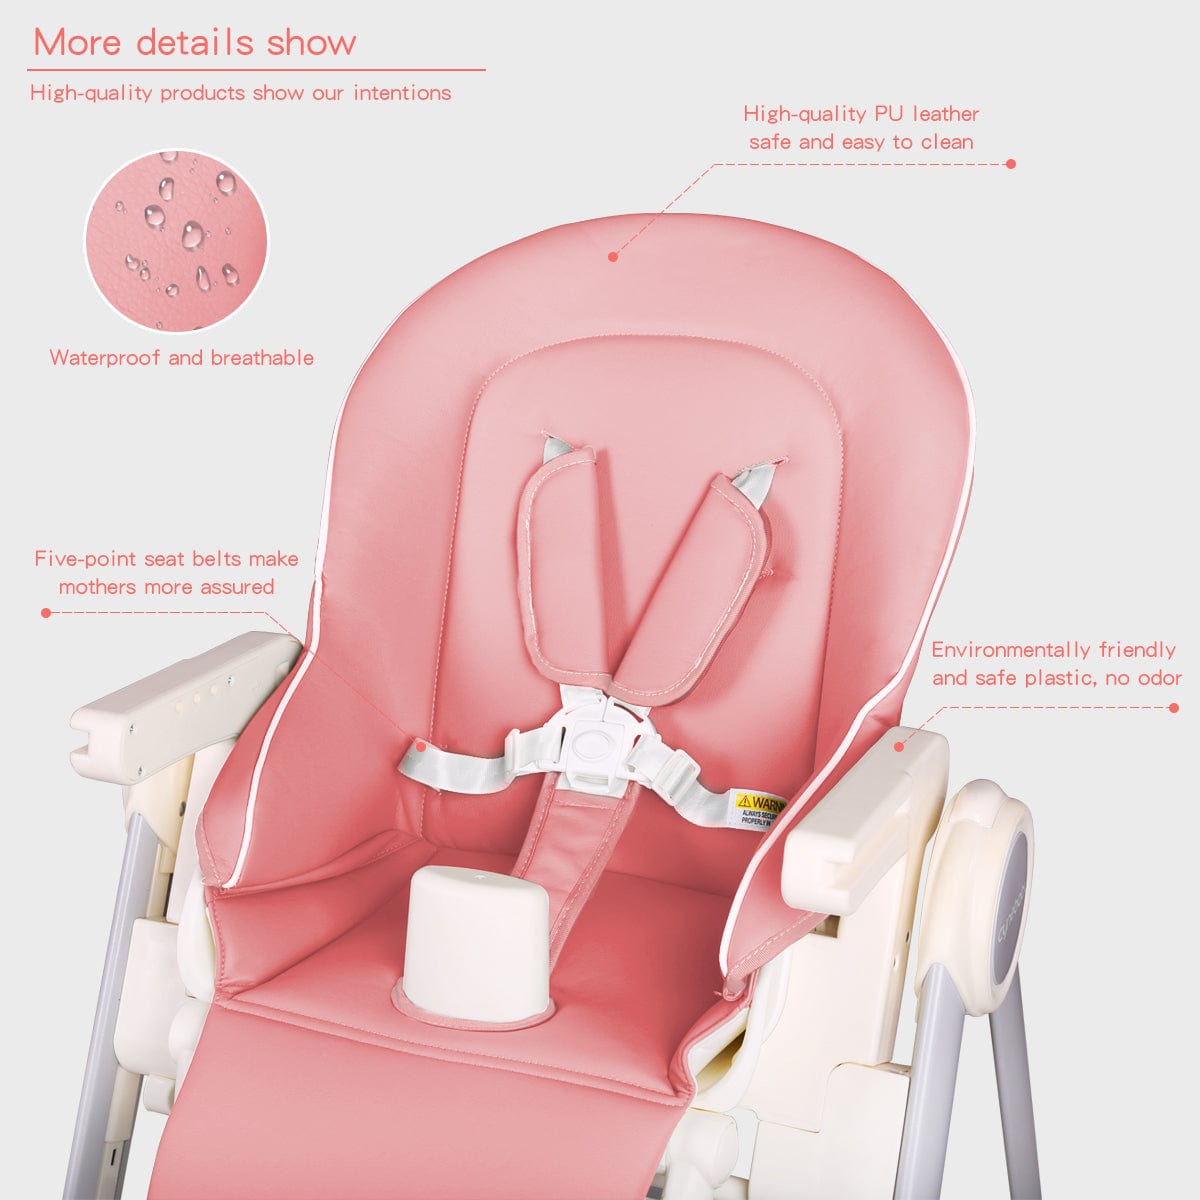 Baby Products Multi function Foldable Baby High Dining Chair with Wheels